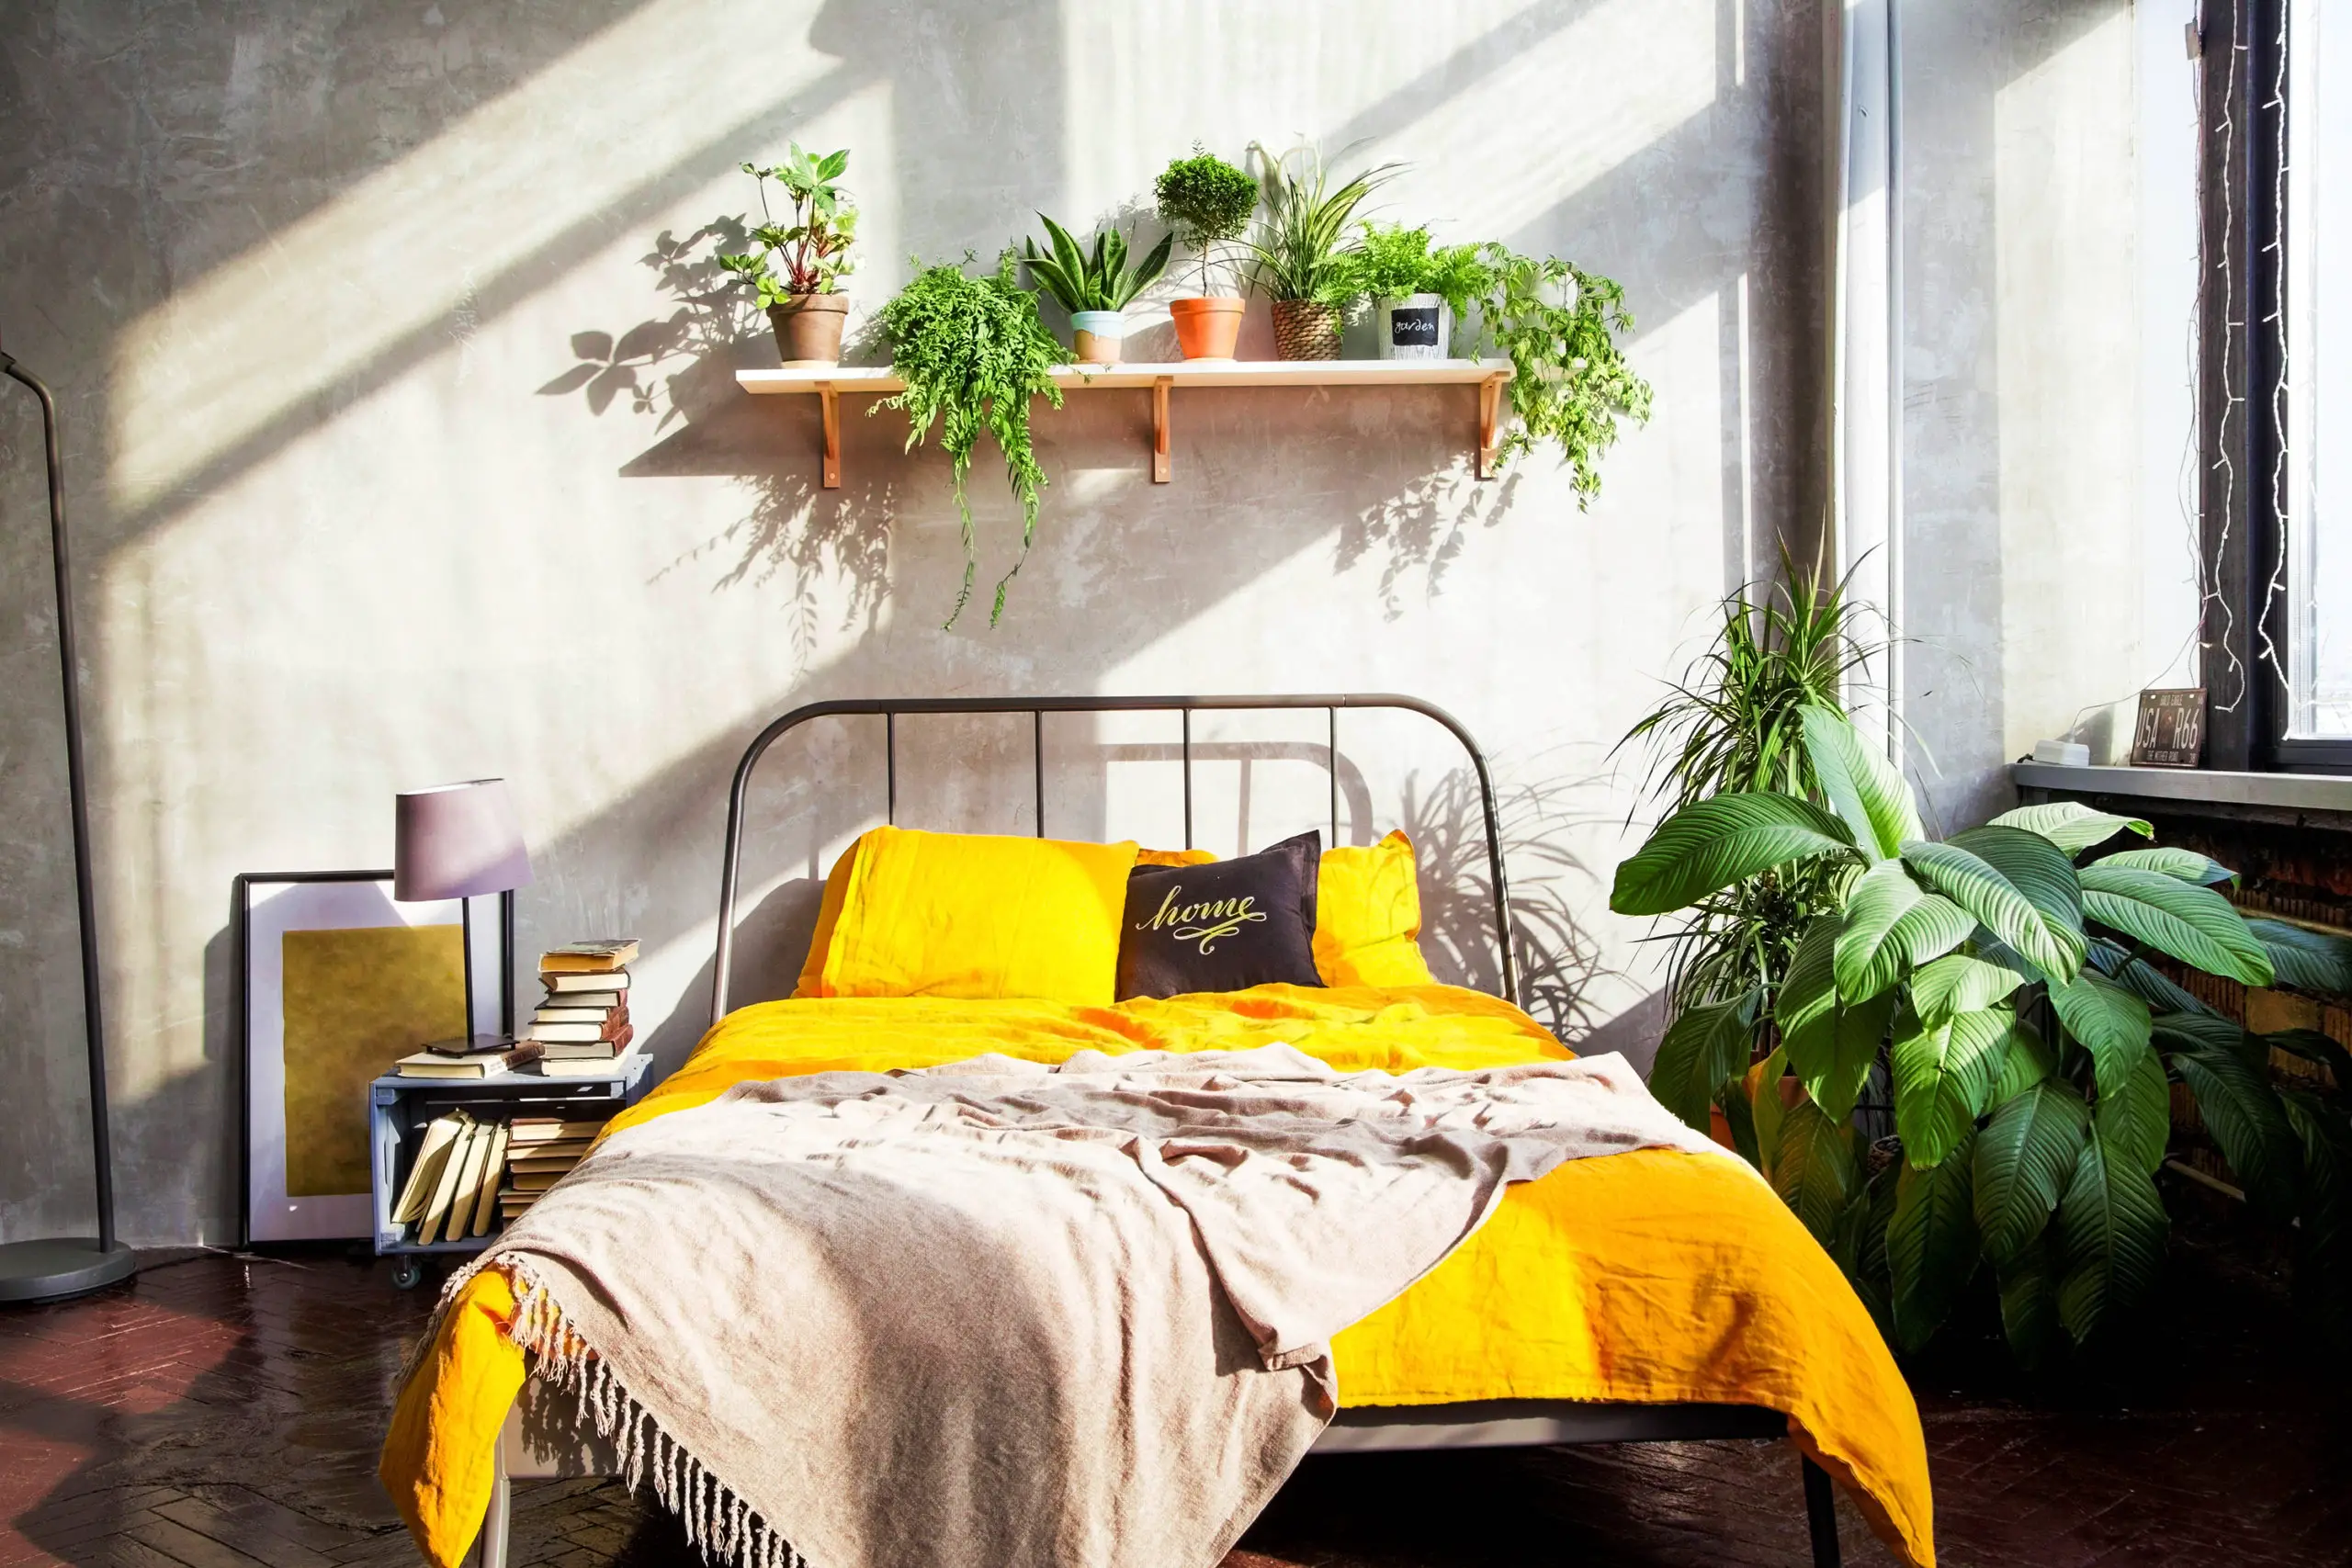 Simple Bedroom Design Ideas That On A Budget But Still Cozy